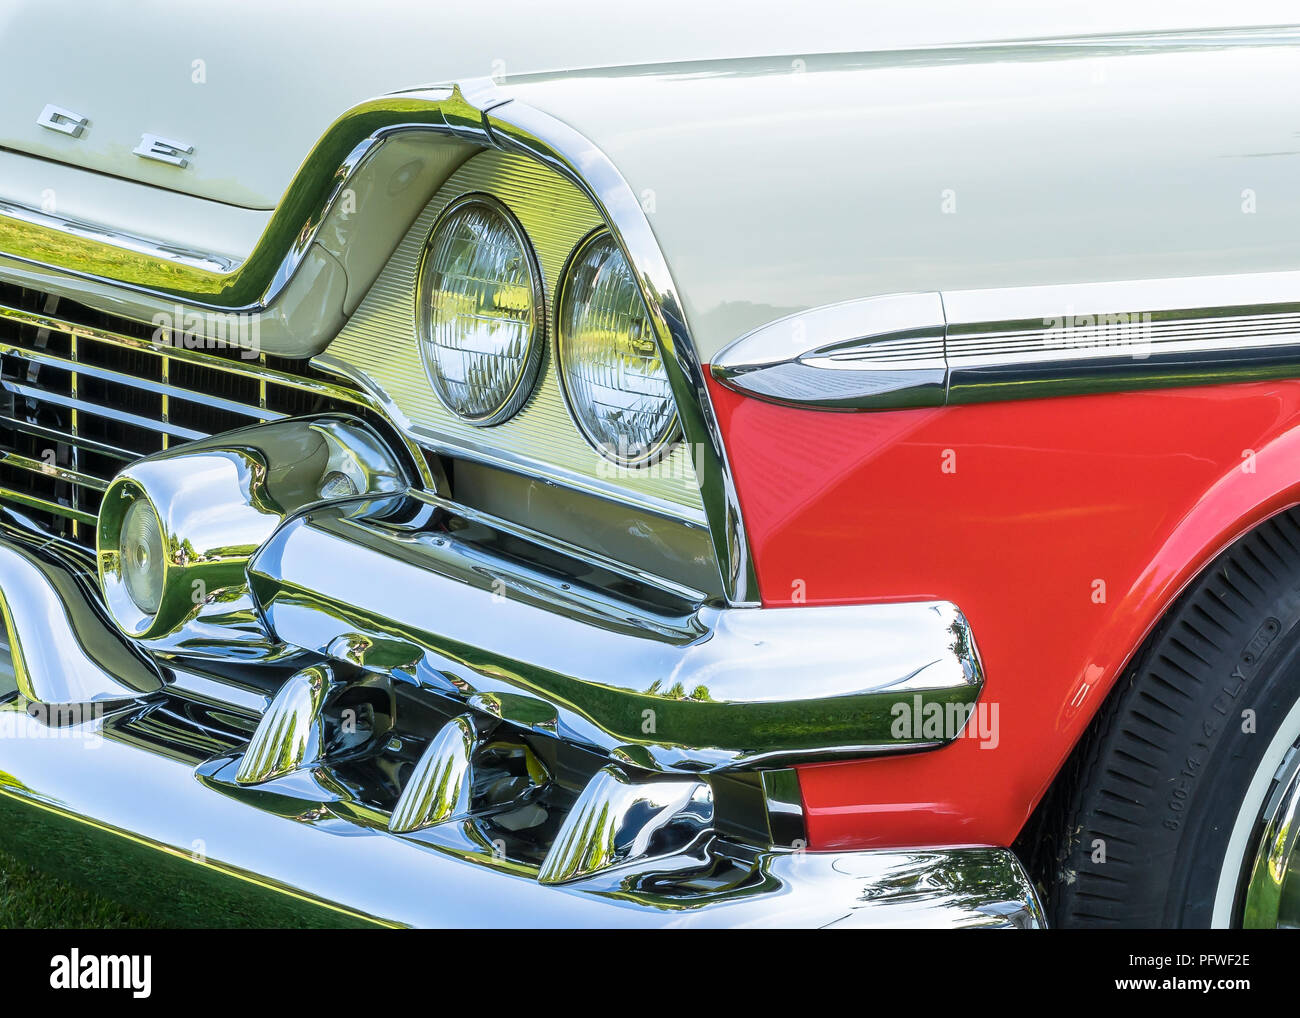 PLYMOUTH, MI/USA - JULY 29, 2018: A 1958 Dodge Custom Royal Lancer headlight on display at the Concours d'Elegance of America car show. Stock Photo